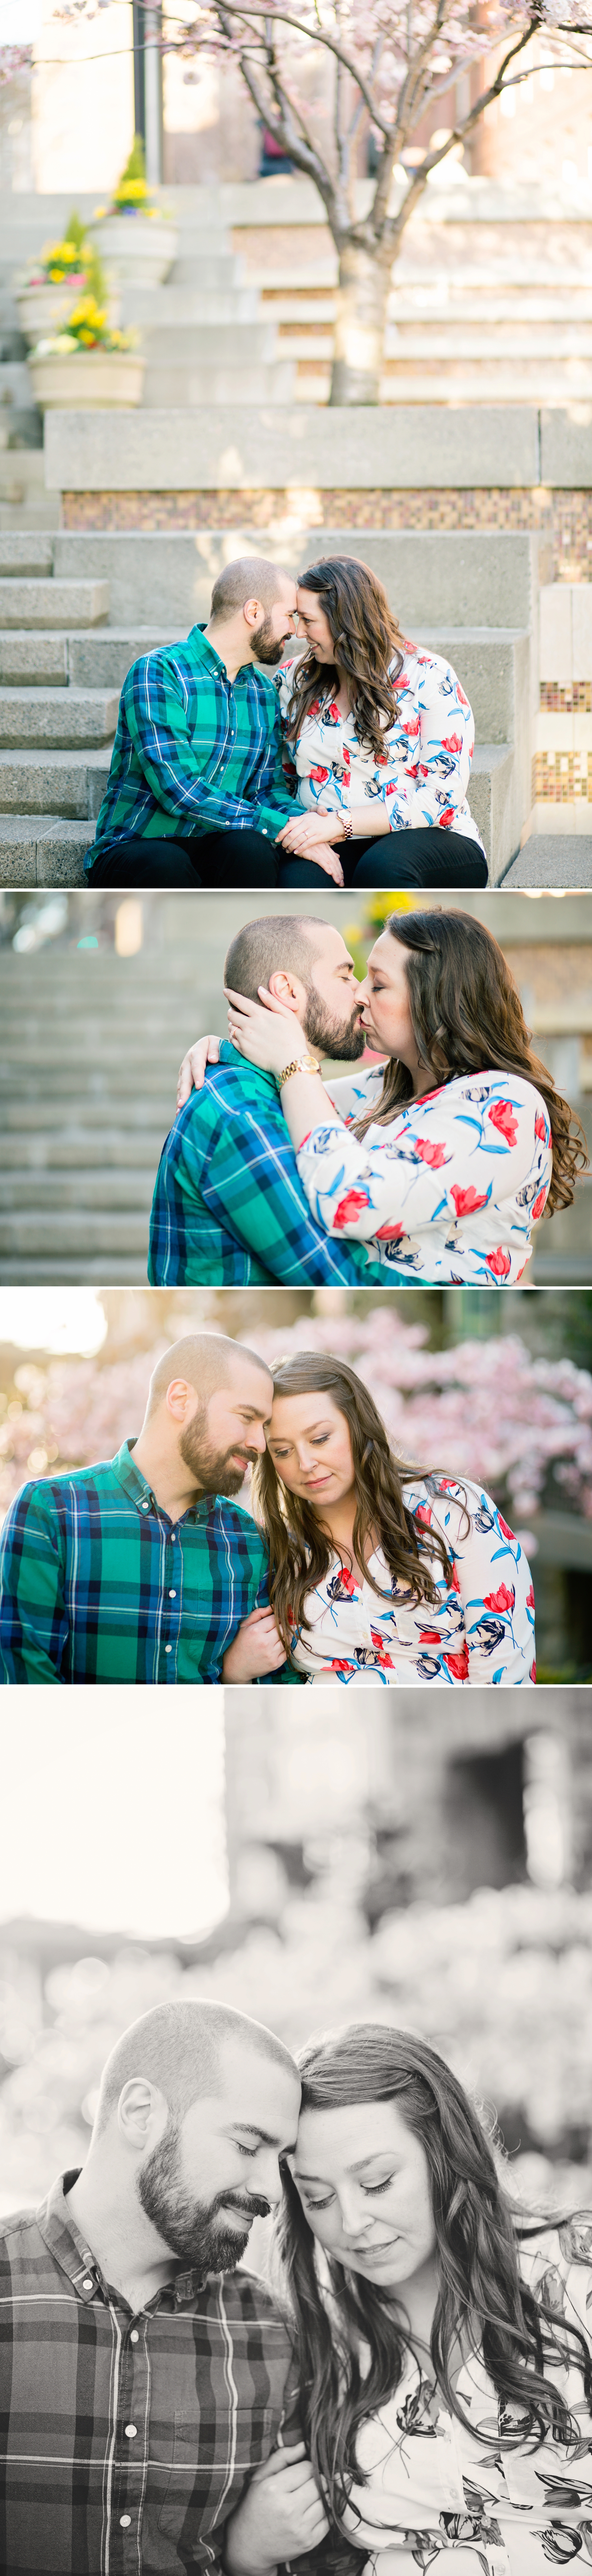 12-Spring-Cherry-Blossoms-Sunset-Engagement-Pictures-Harbor-Steps-Downtown-Seattle-Photographer-Wedding-Photography-by-Betty-Elaine